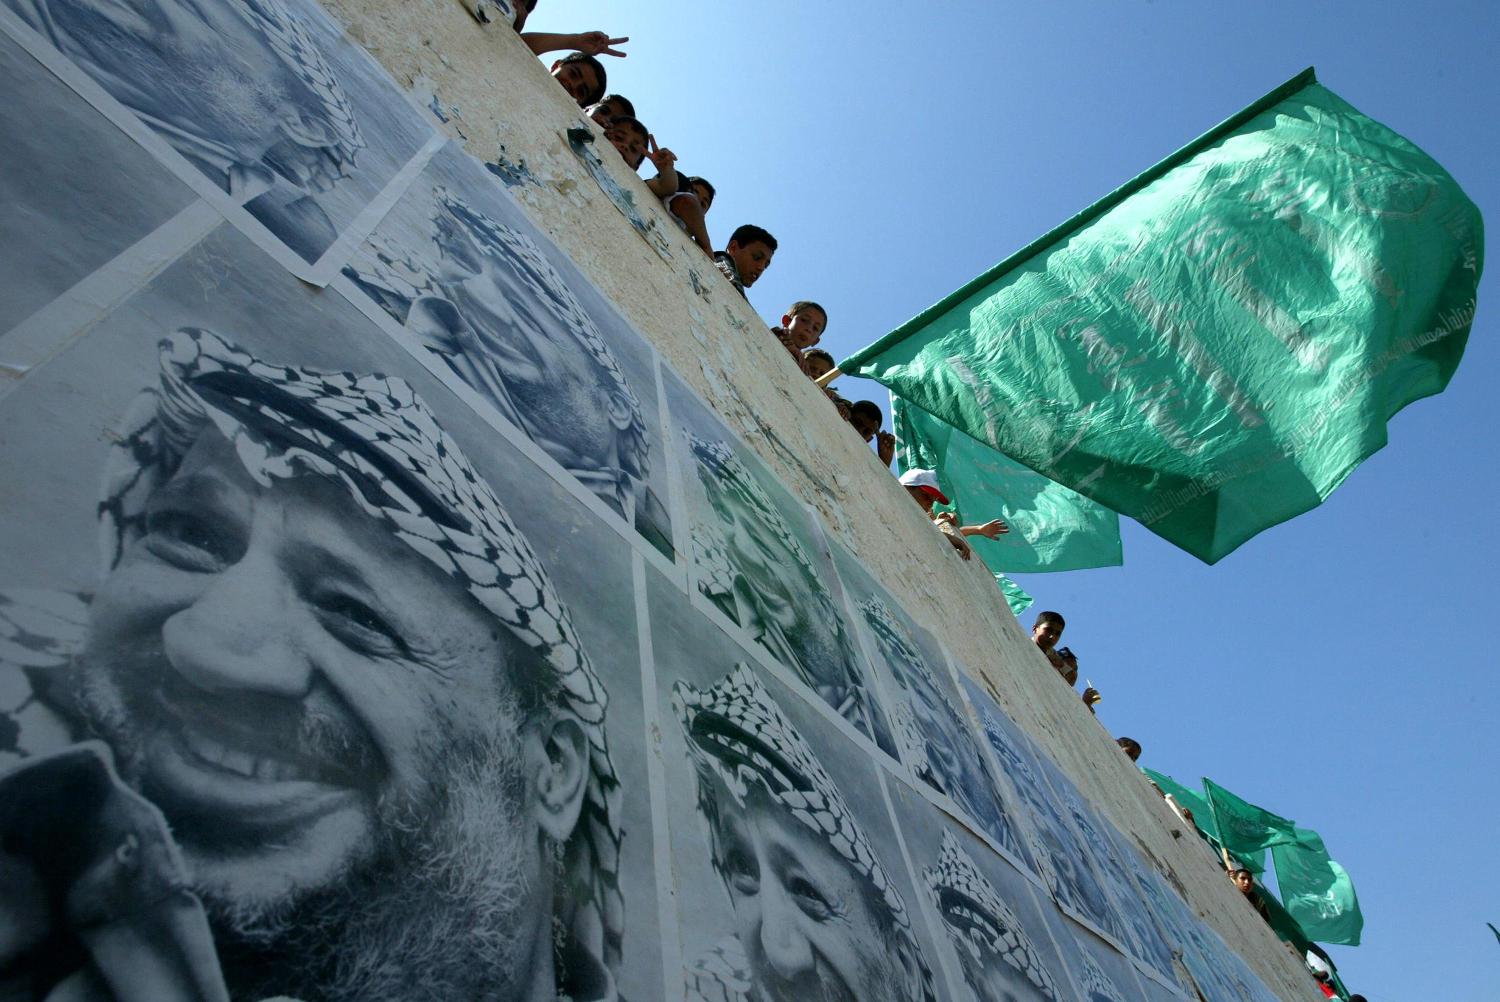 Palestinian supporters of Hamas wave an Islamic flag next to posters of Palestinian leader Yasser Arafat during a rally calling for the release of prisoners held in Israeli jails in 2003 in Gaza City. ( Abid Katib/Getty Images)